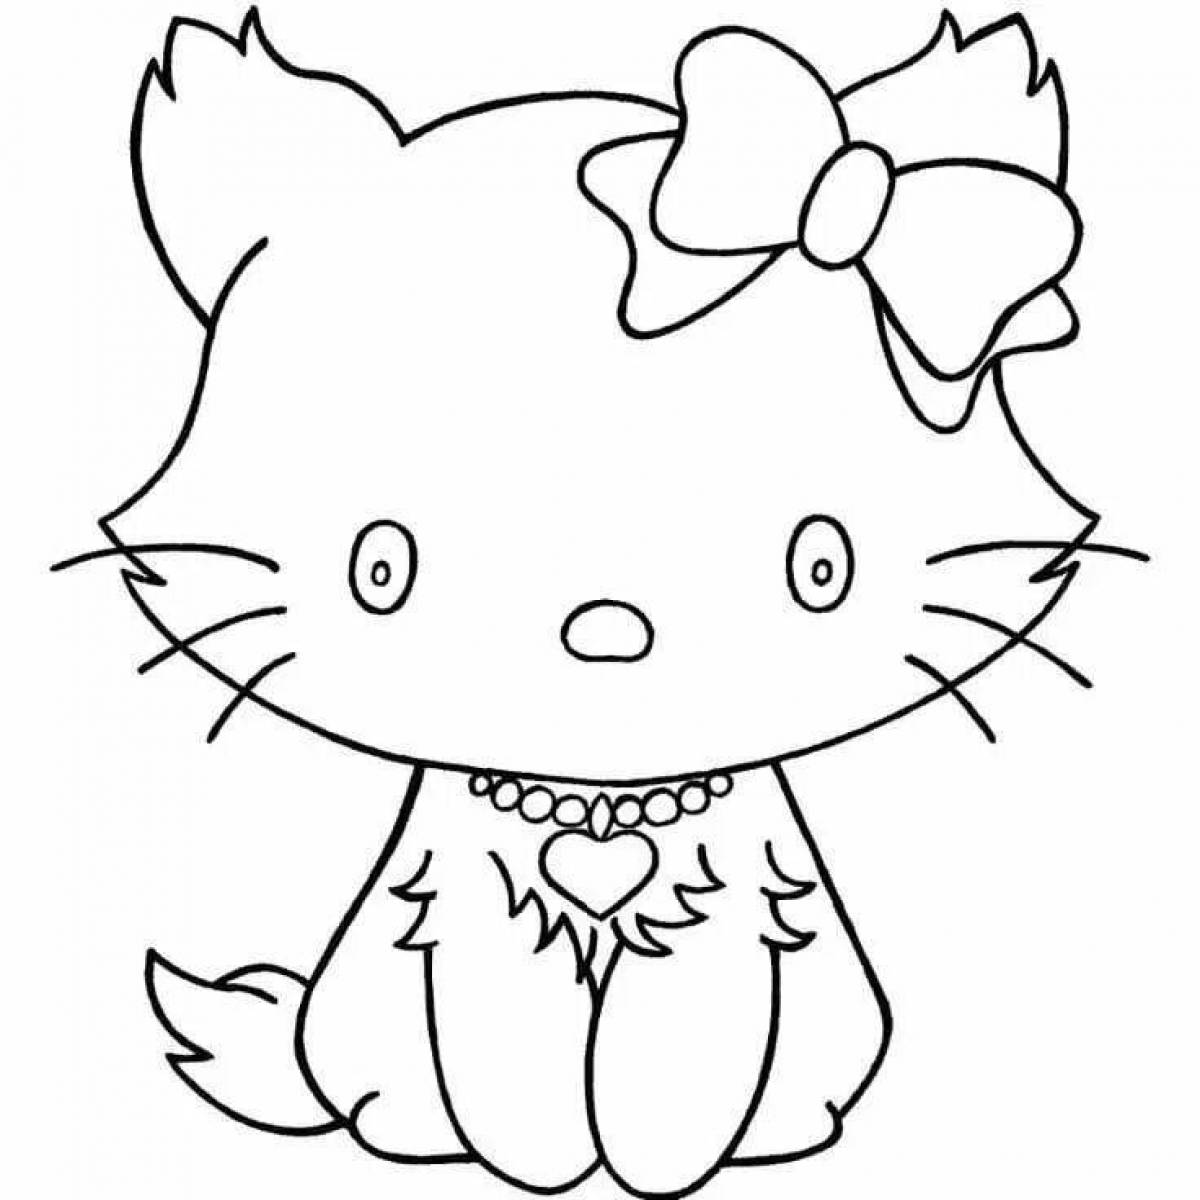 Coloring book smiling kitten with a bow